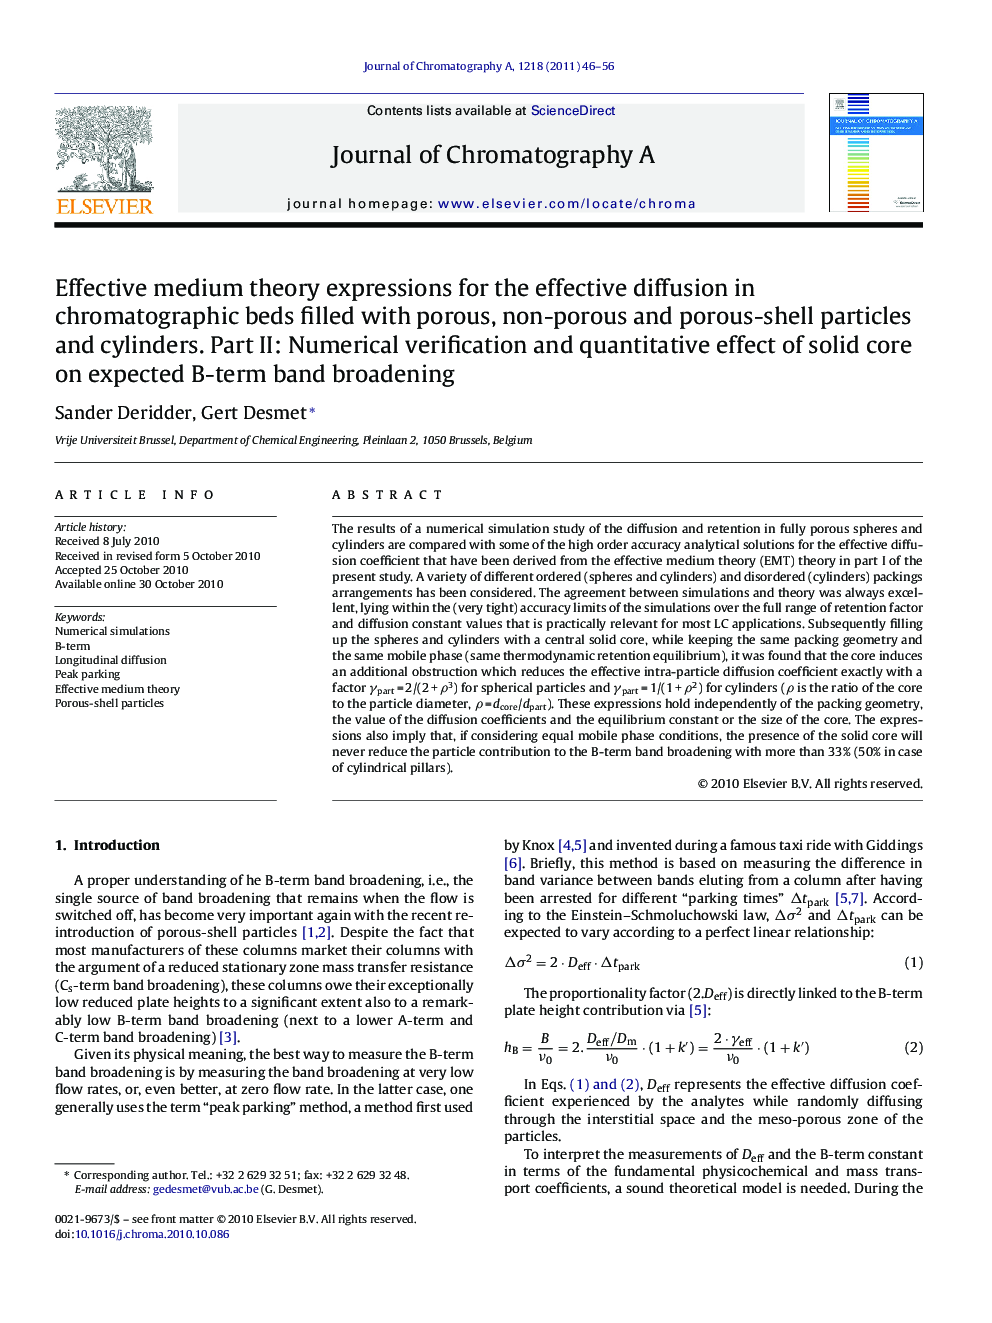 Effective medium theory expressions for the effective diffusion in chromatographic beds filled with porous, non-porous and porous-shell particles and cylinders. Part II: Numerical verification and quantitative effect of solid core on expected B-term band 